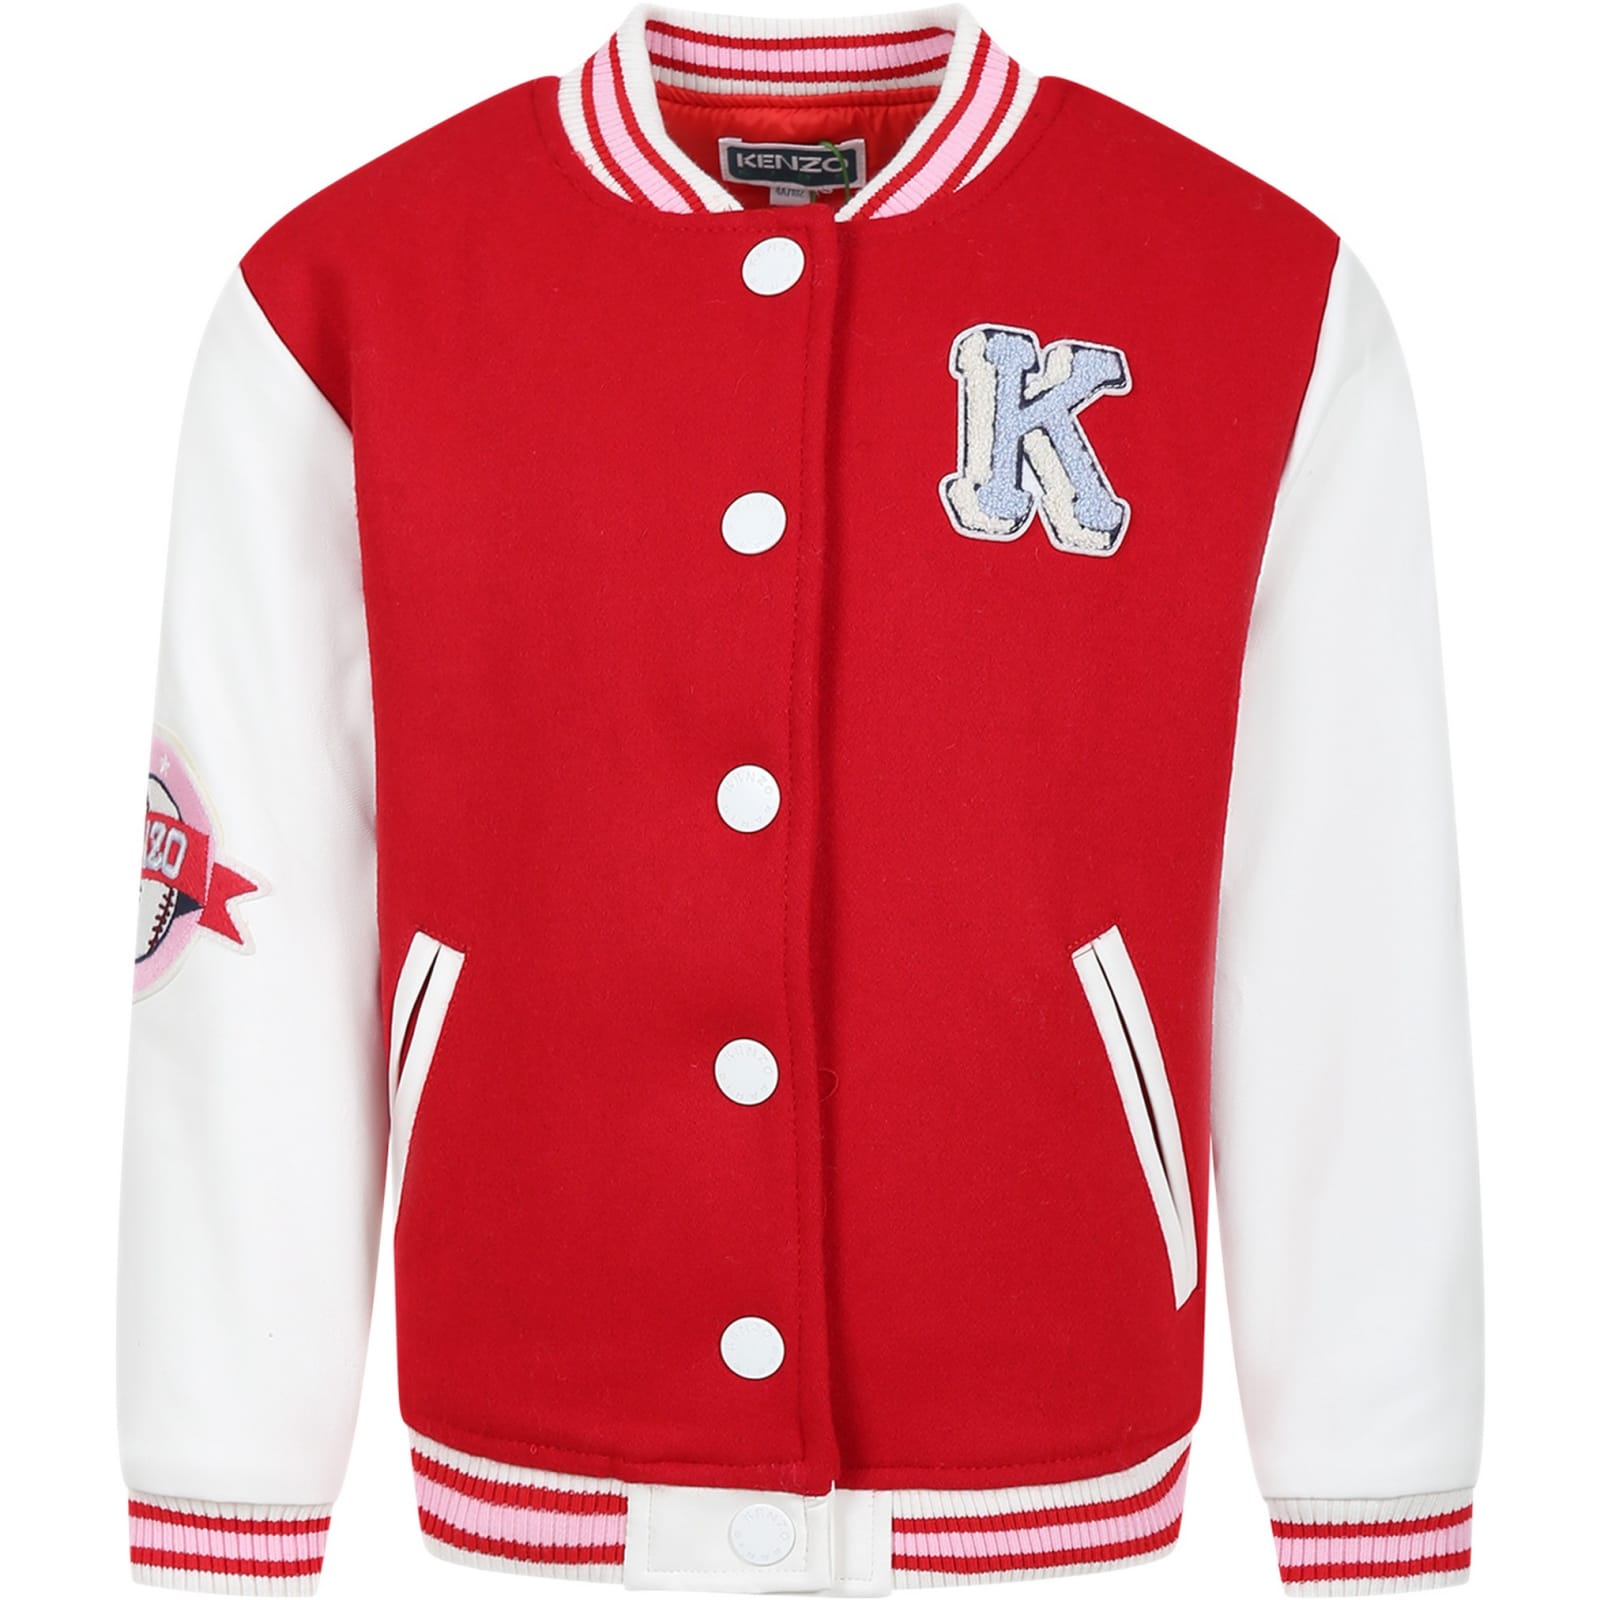 KENZO RED JACKET FOR GIRL WITH LOGO AND TIGER